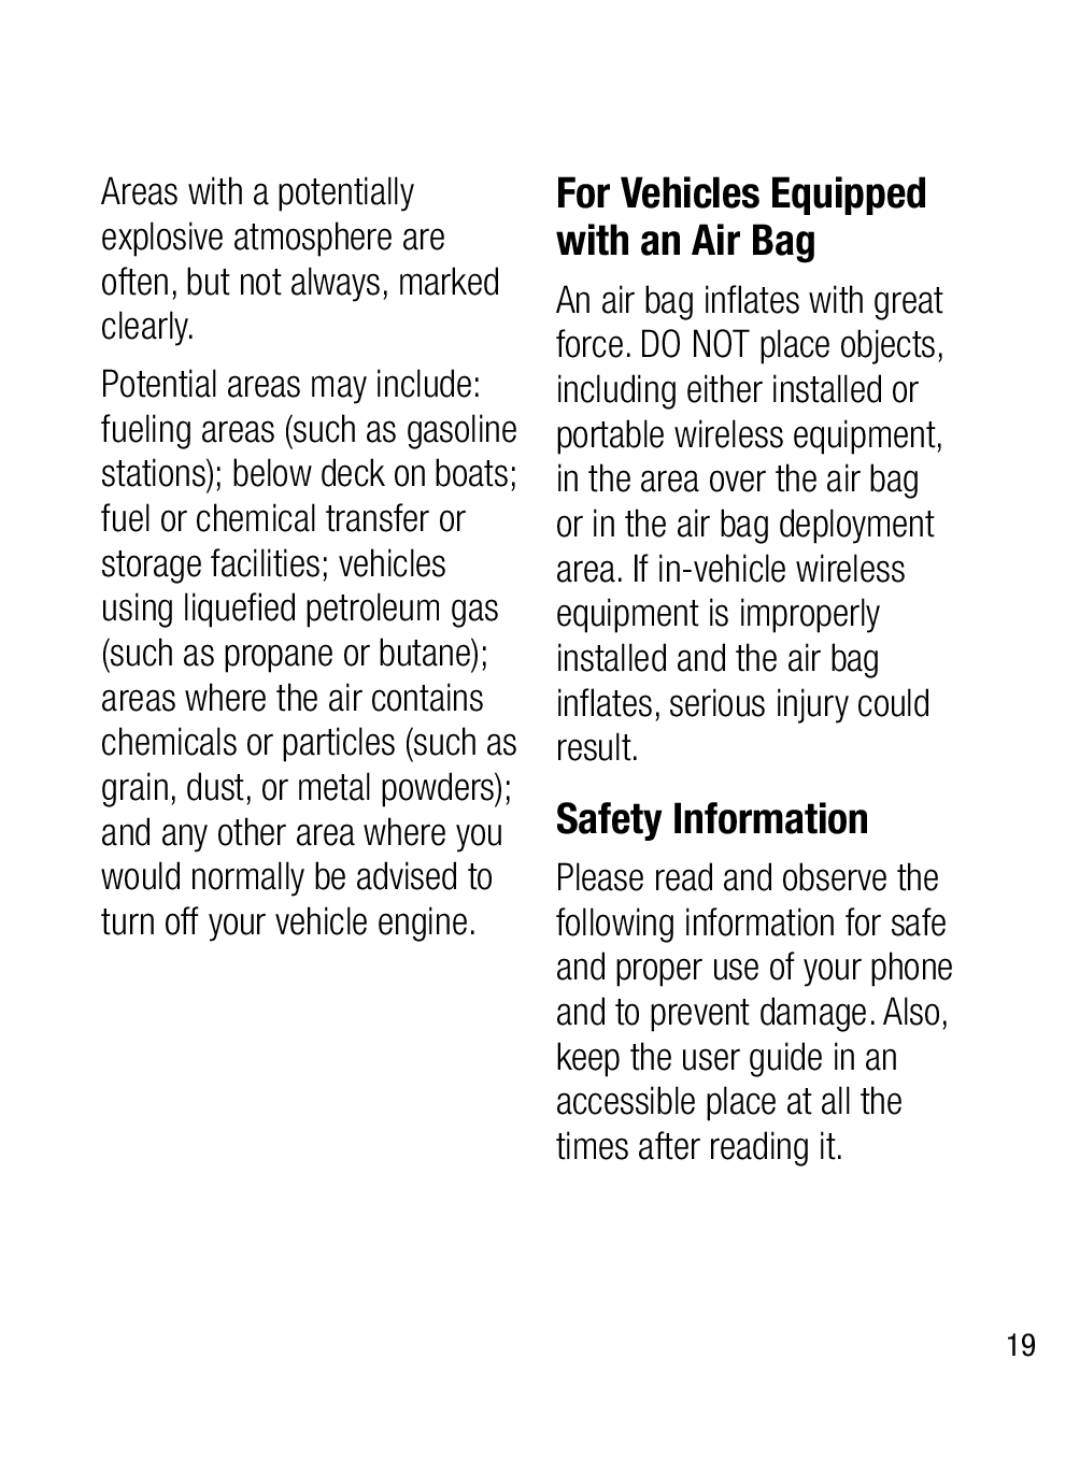 LG Electronics A133CH For Vehicles Equipped with an Air Bag, inﬂ ates, serious injury could result, Safety Information 